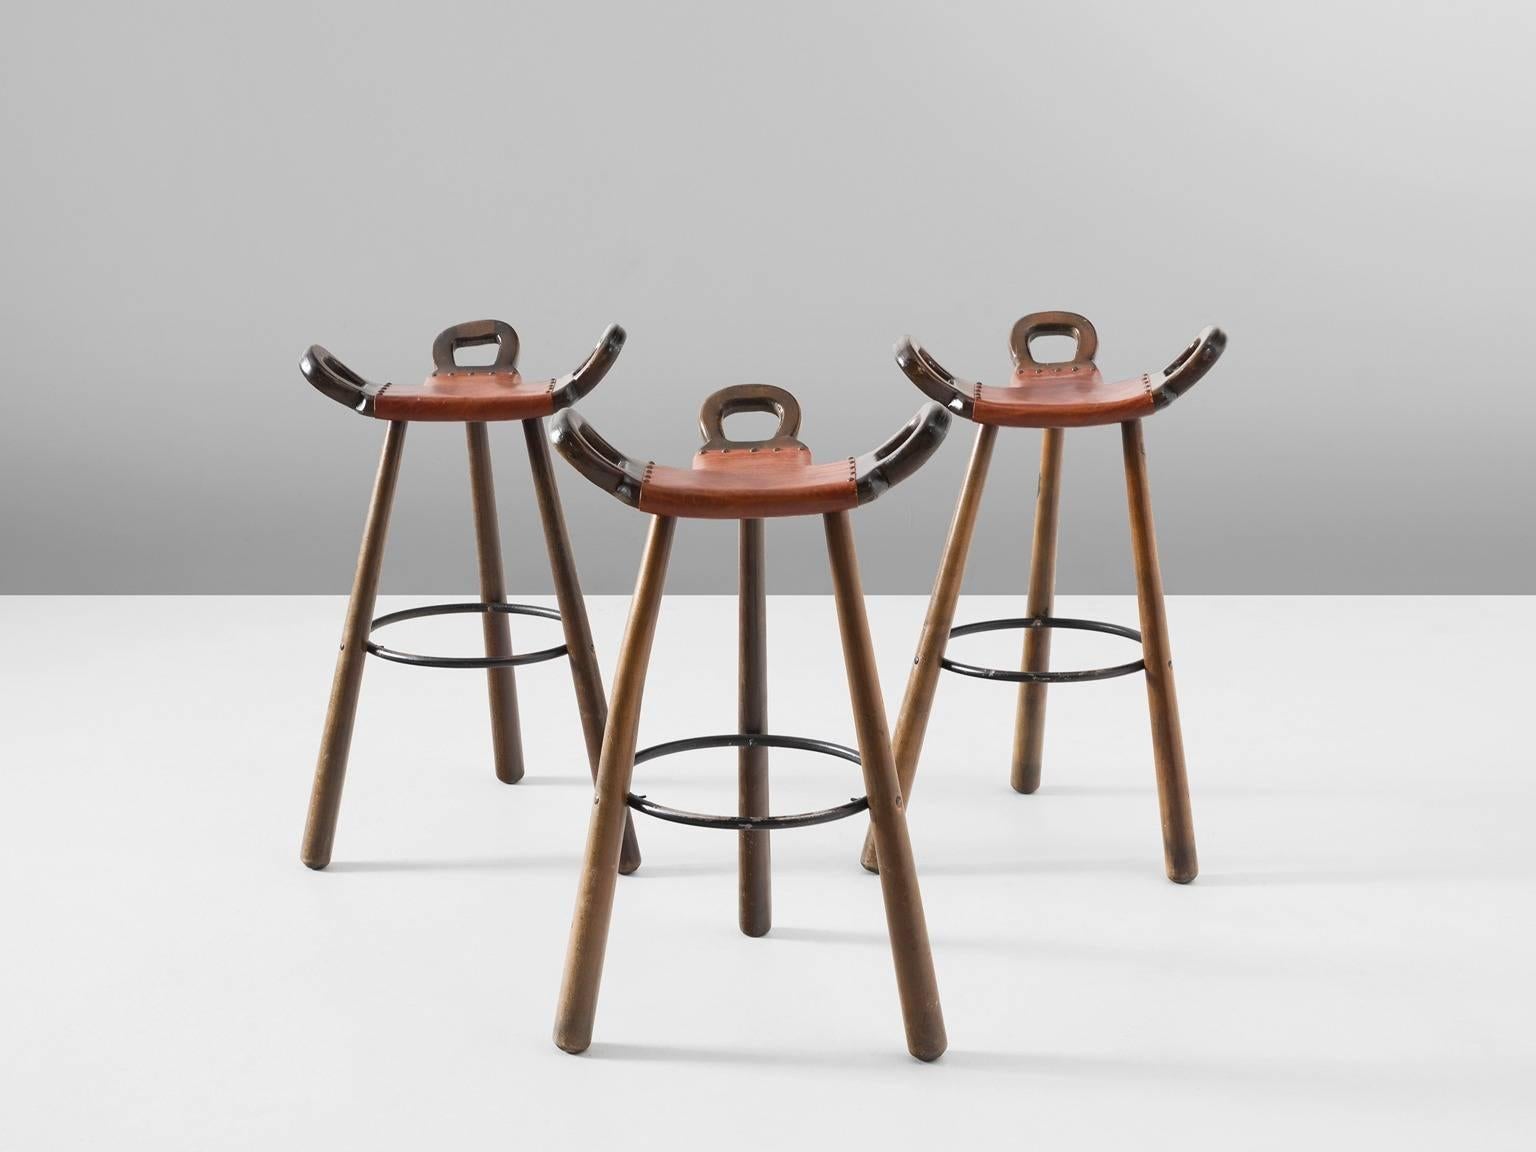 Set of three 'Brutalist' or 'Marbella' bar stools, in stained beech, leather and metal, Spain, 1970s. 

Set of three Brutalist bar stools in dark-brown stained beech. The eye-catching part is the seating. A curved T-shape with three handles. The